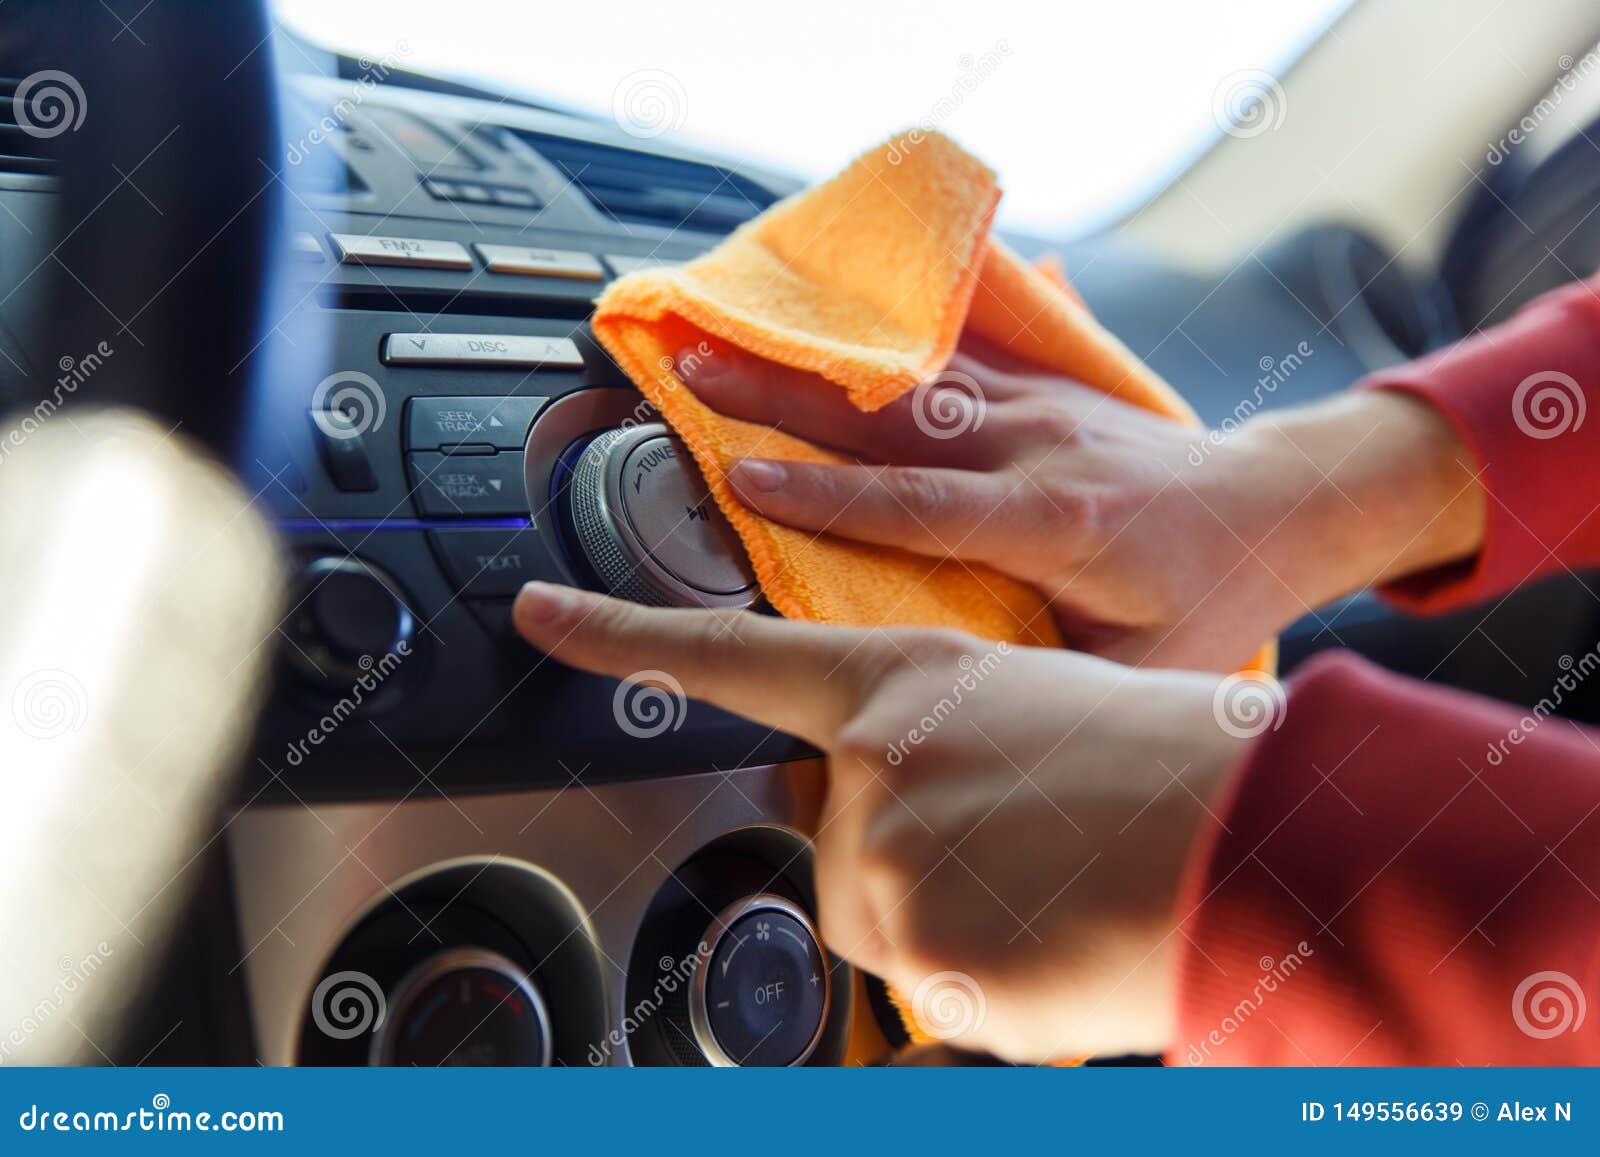 Picture Of Male S Hand With Orange Rag Washing Car Interior